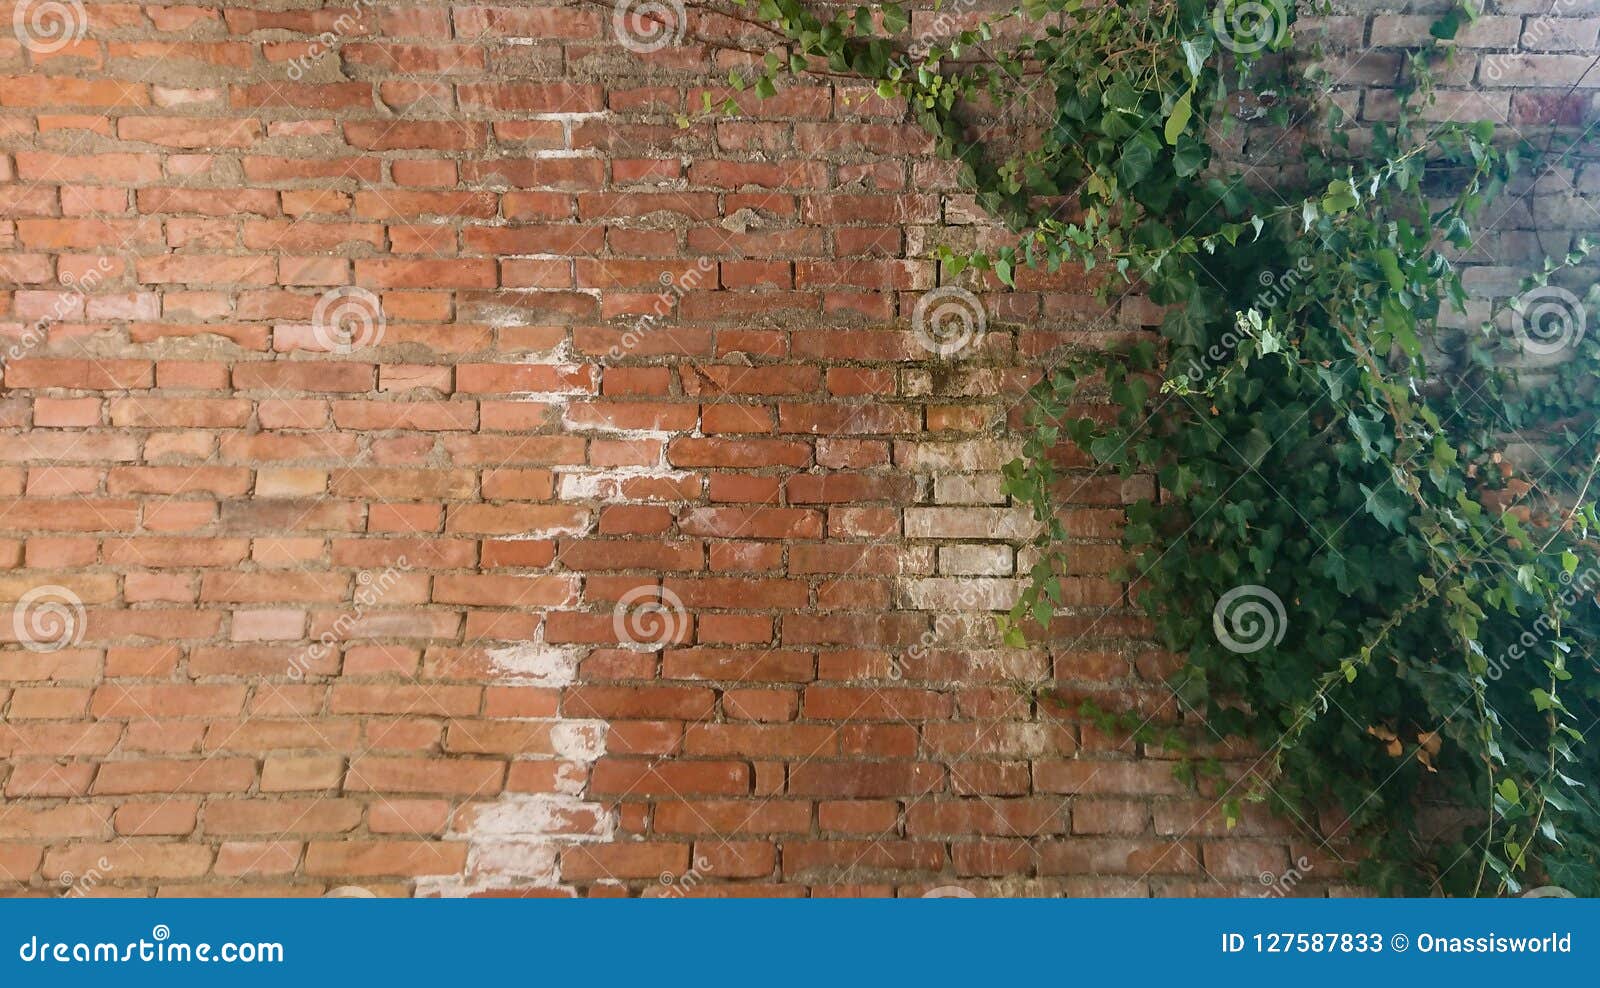 Wall Background with Plants Stock Image - Image of wall, green: 127587833